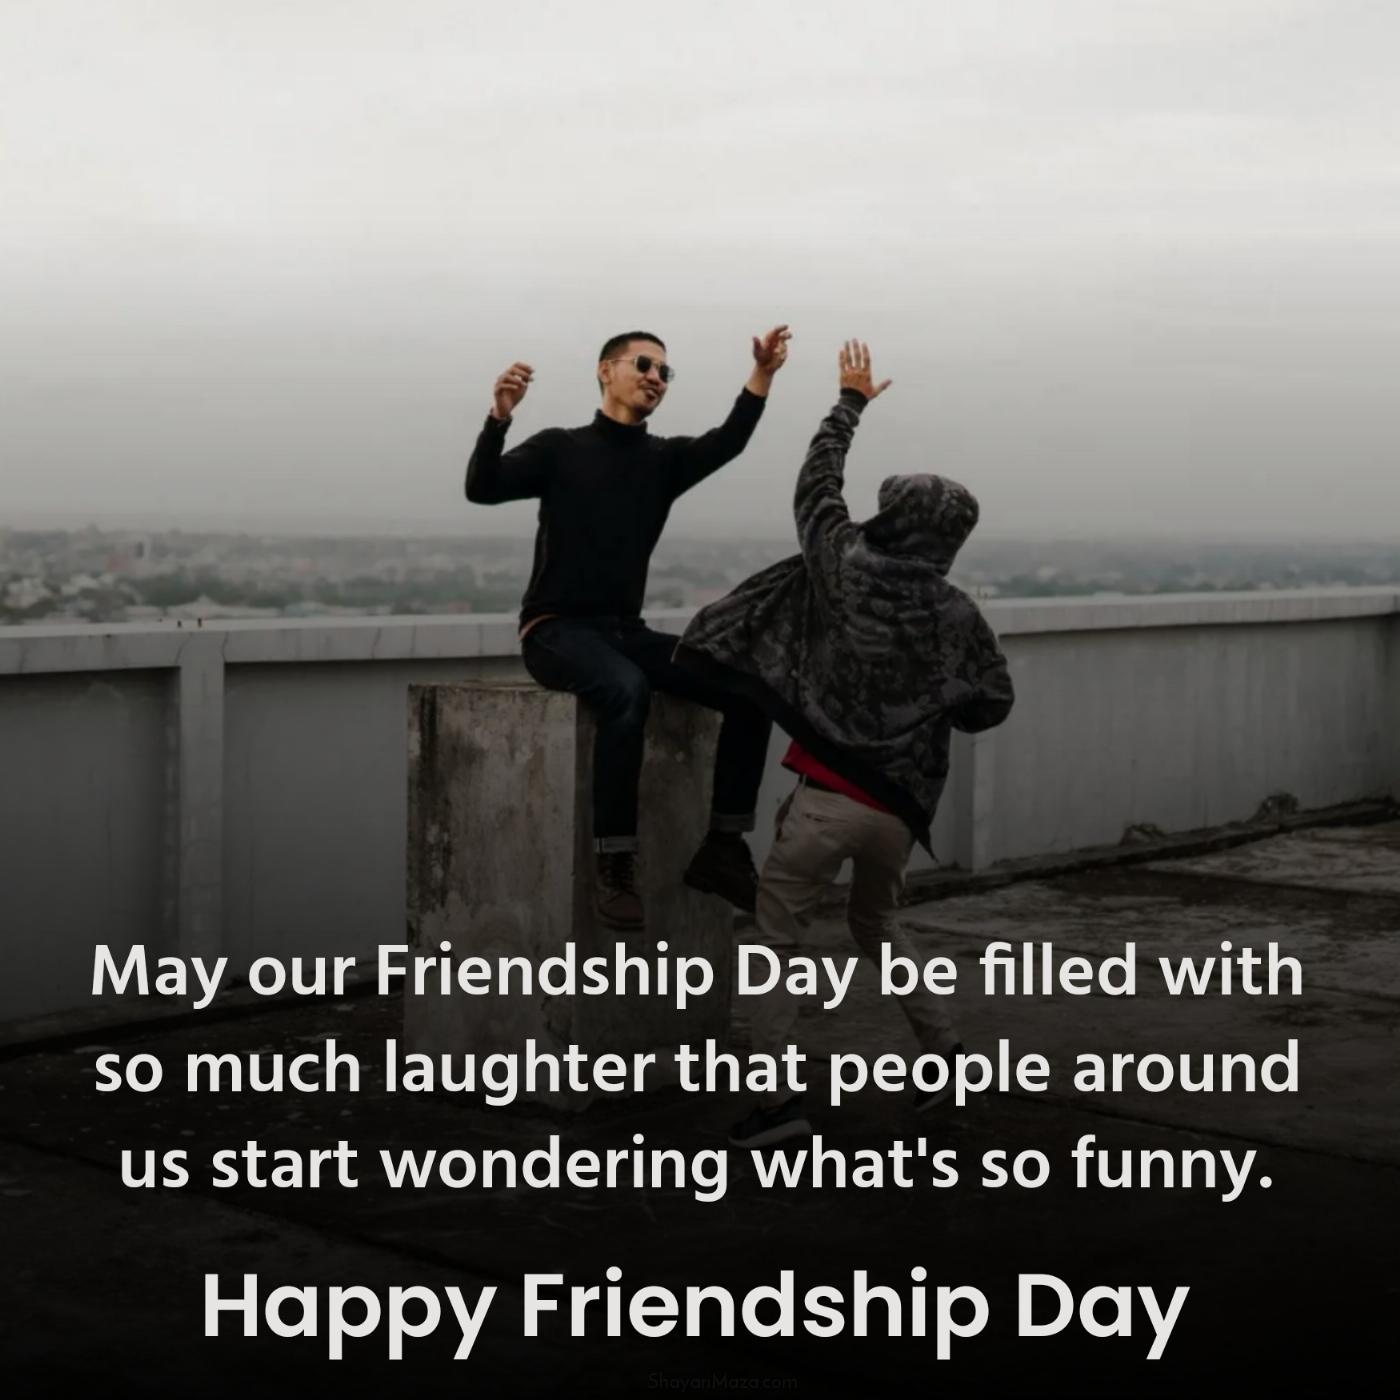 May our Friendship Day be filled with so much laughter that people around us